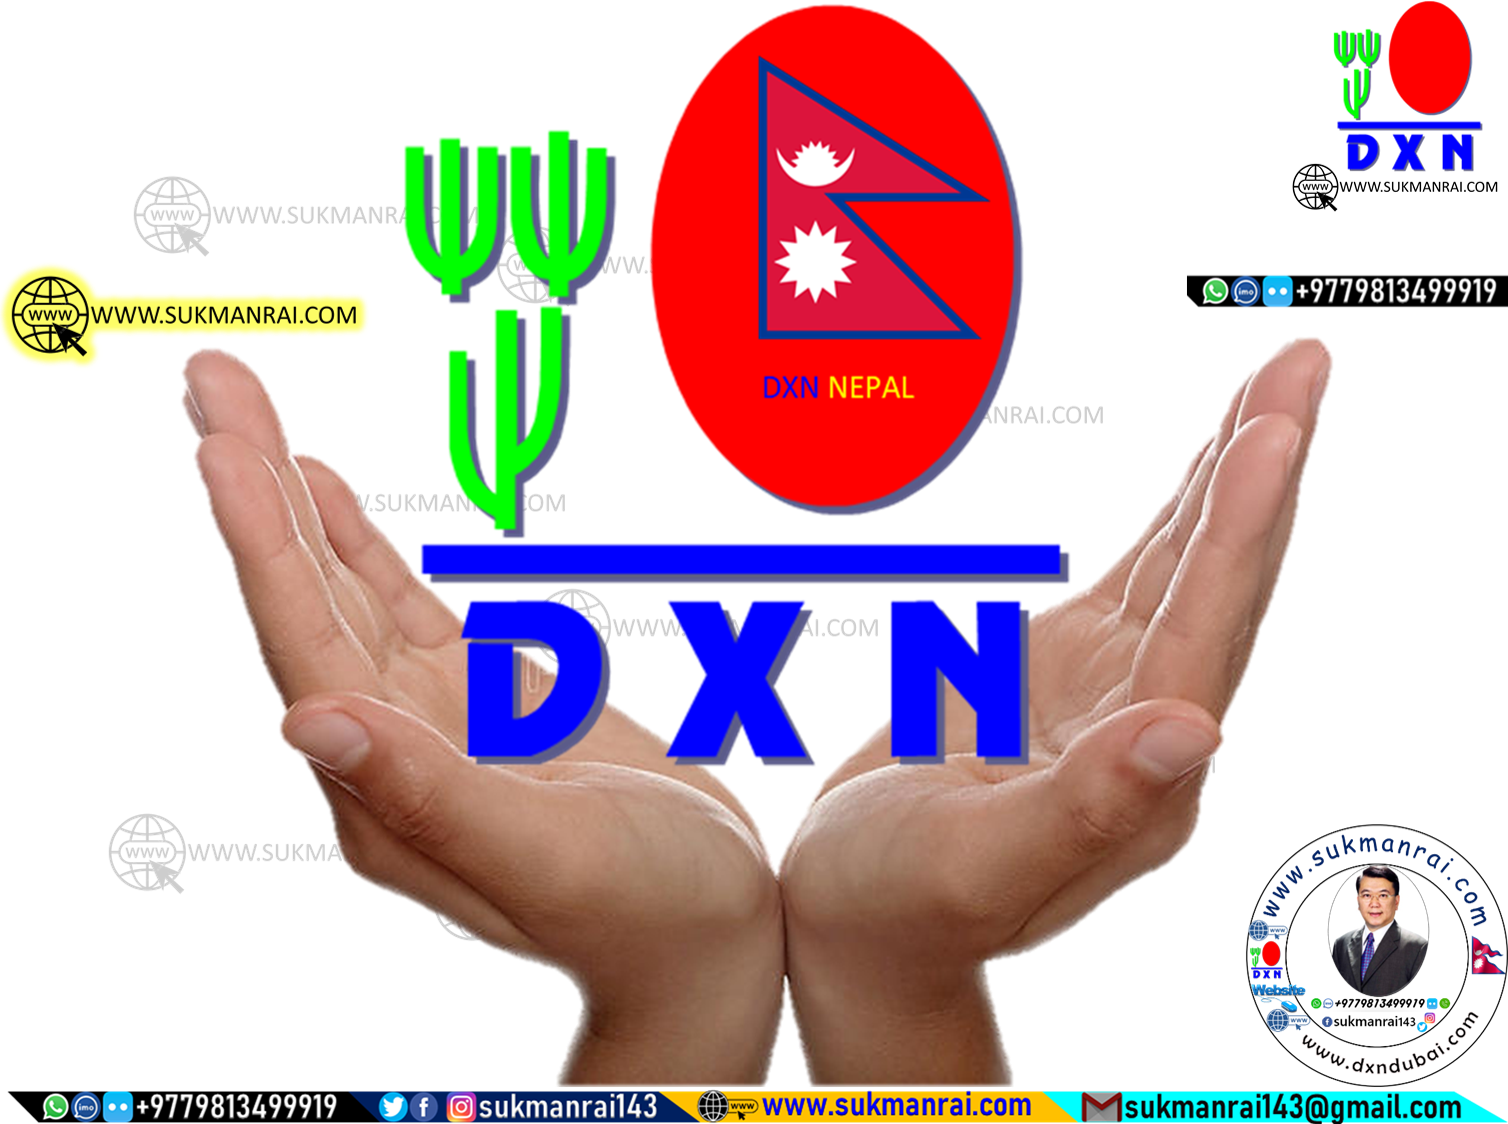 All country’s DXN Stockiest contact number